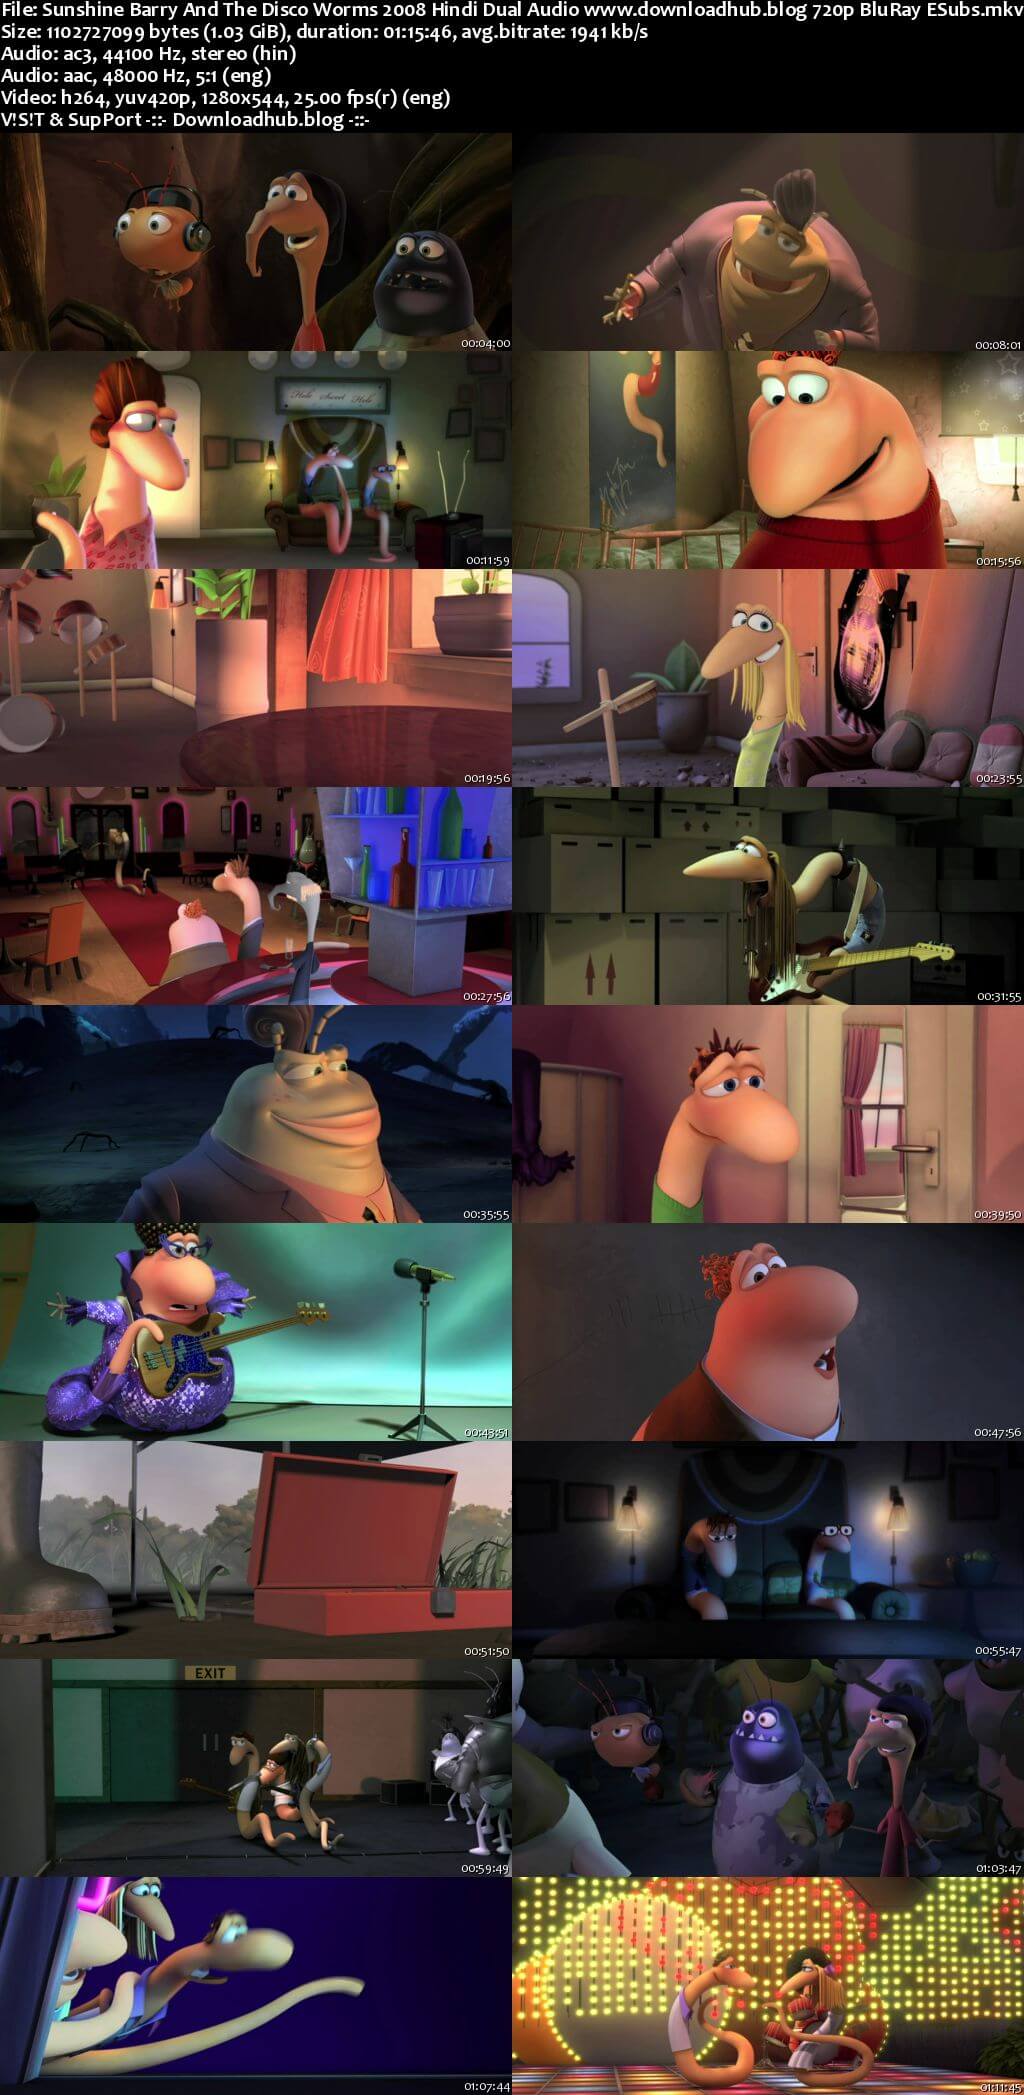 Sunshine Barry And The Disco Worms 2008 Hindi Dual Audio 720p BluRay ESubs